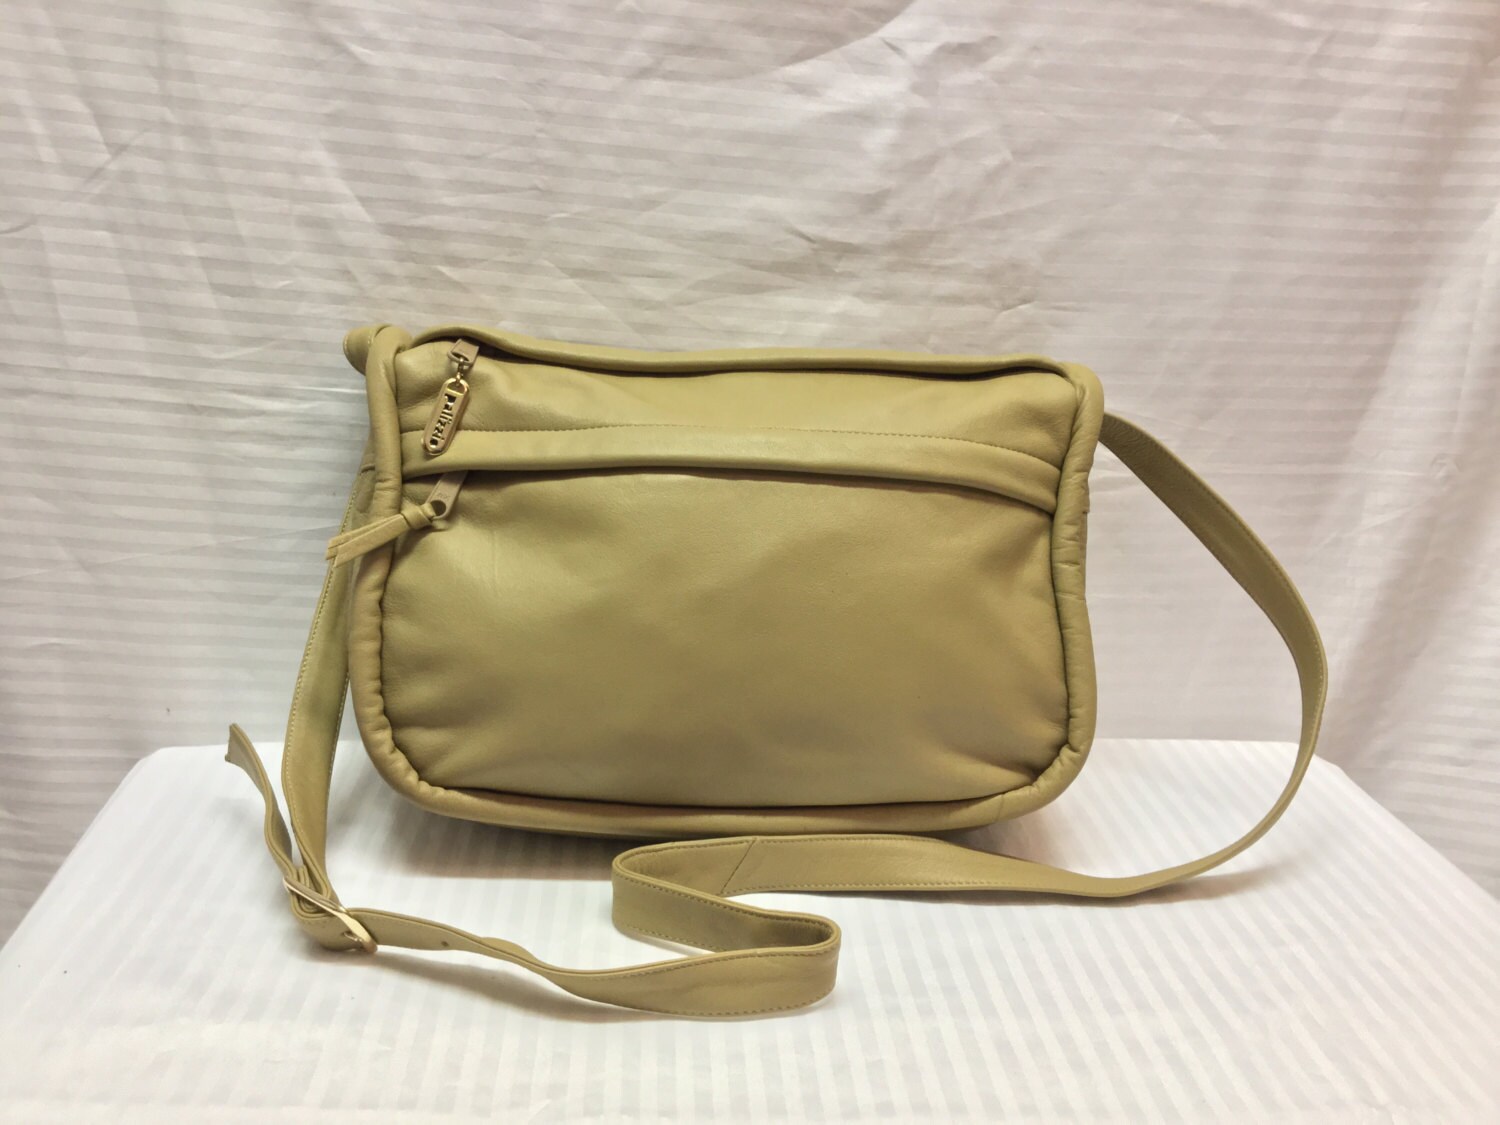 Palizzioleather pursebag Tan Leather Shoulder by crazygoodbananas